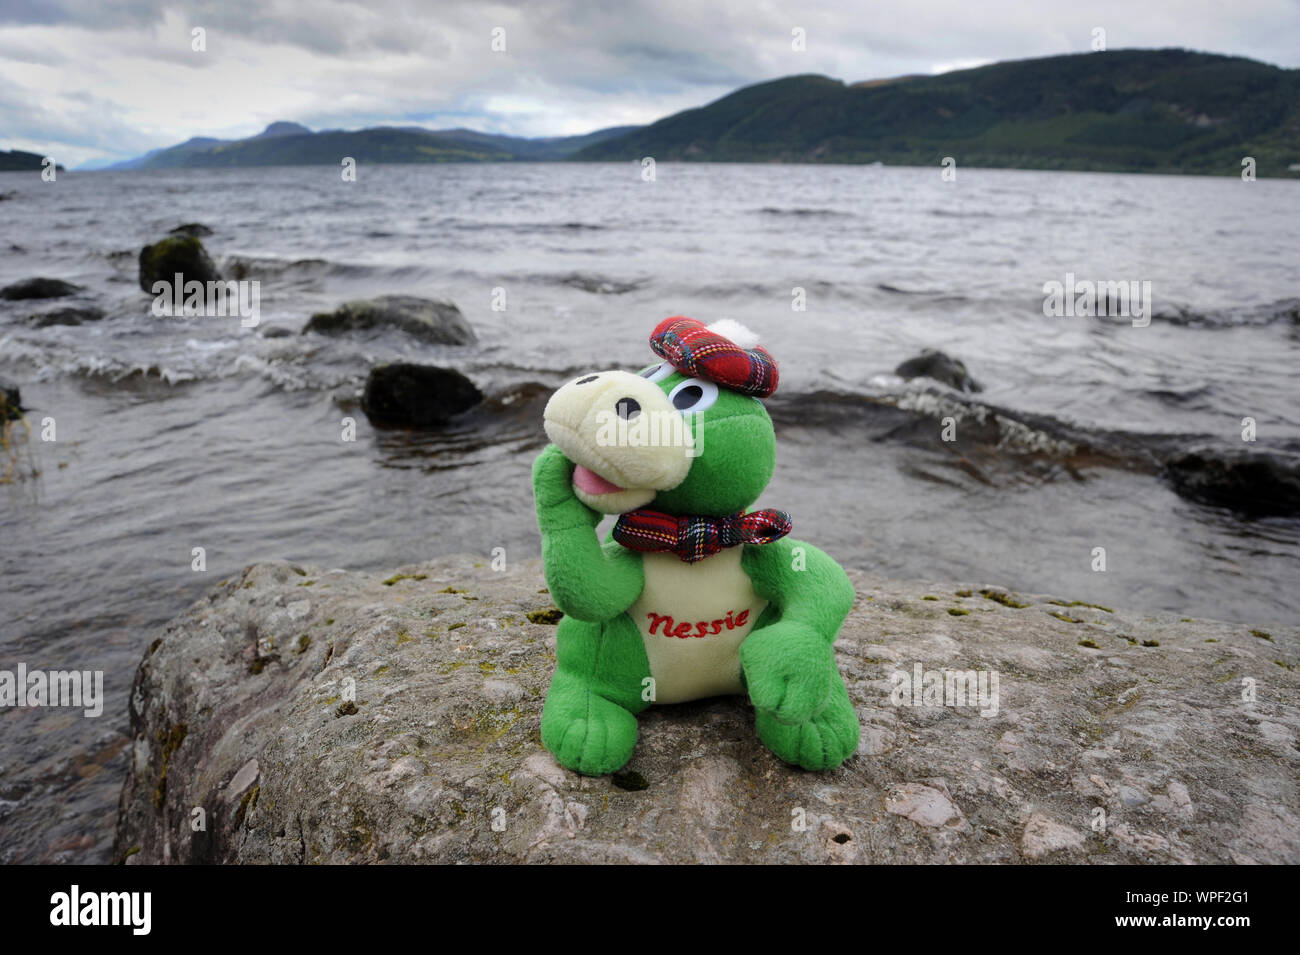 LOCH NESS MONSTER 'NESSIE' TOY ON THE SIDE OF LOCH NESS SCOTLAND RE MYSTERY MYTHS LEGENDS TOURISM TOURISTS HOLIDAYS ETC UK Stock Photo